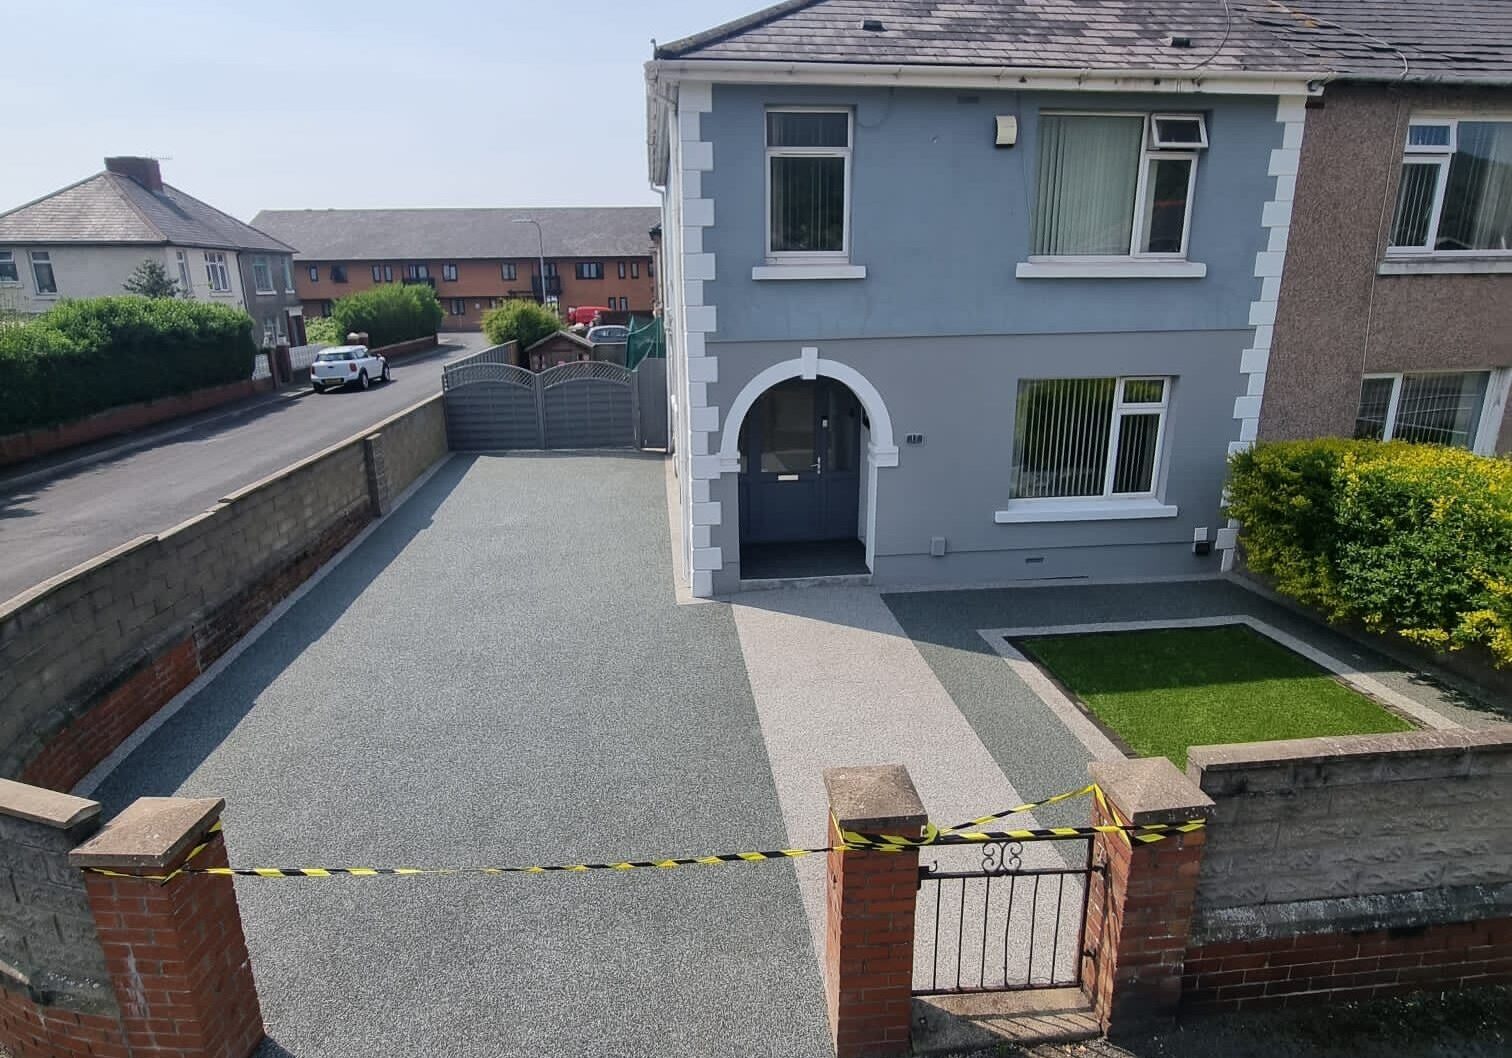 This is a photo of a Resin driveway carried out in Swansea. All works done by Resin Driveways Swansea